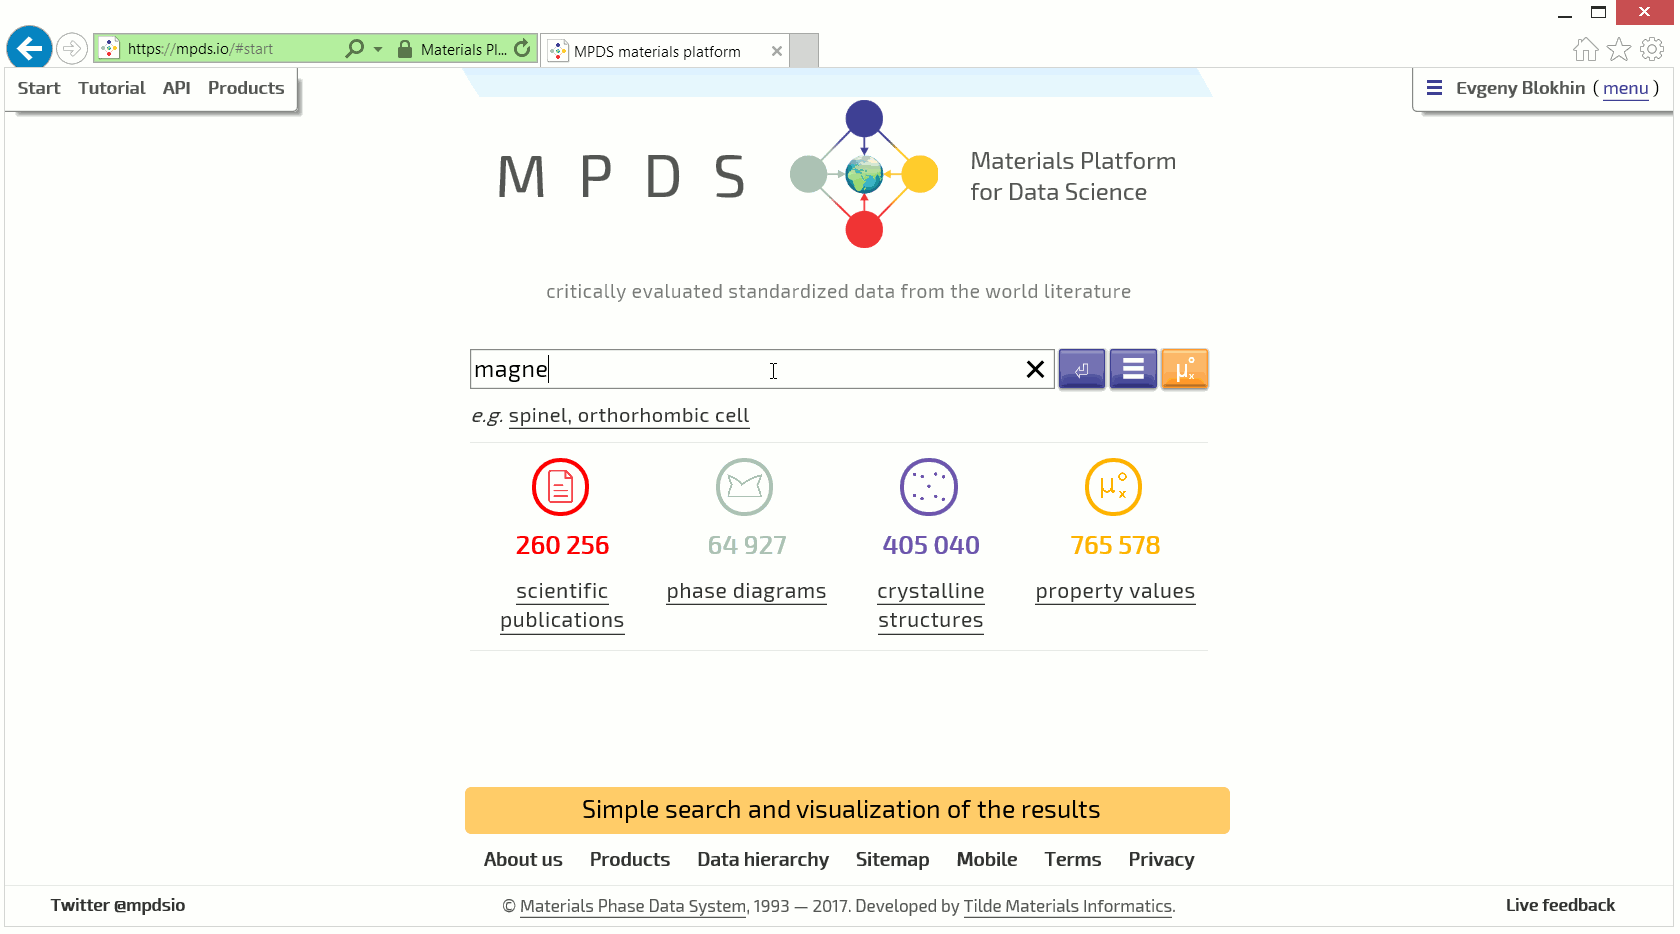 Rich MPDS web-interface: plotting the results of the search as a matrix